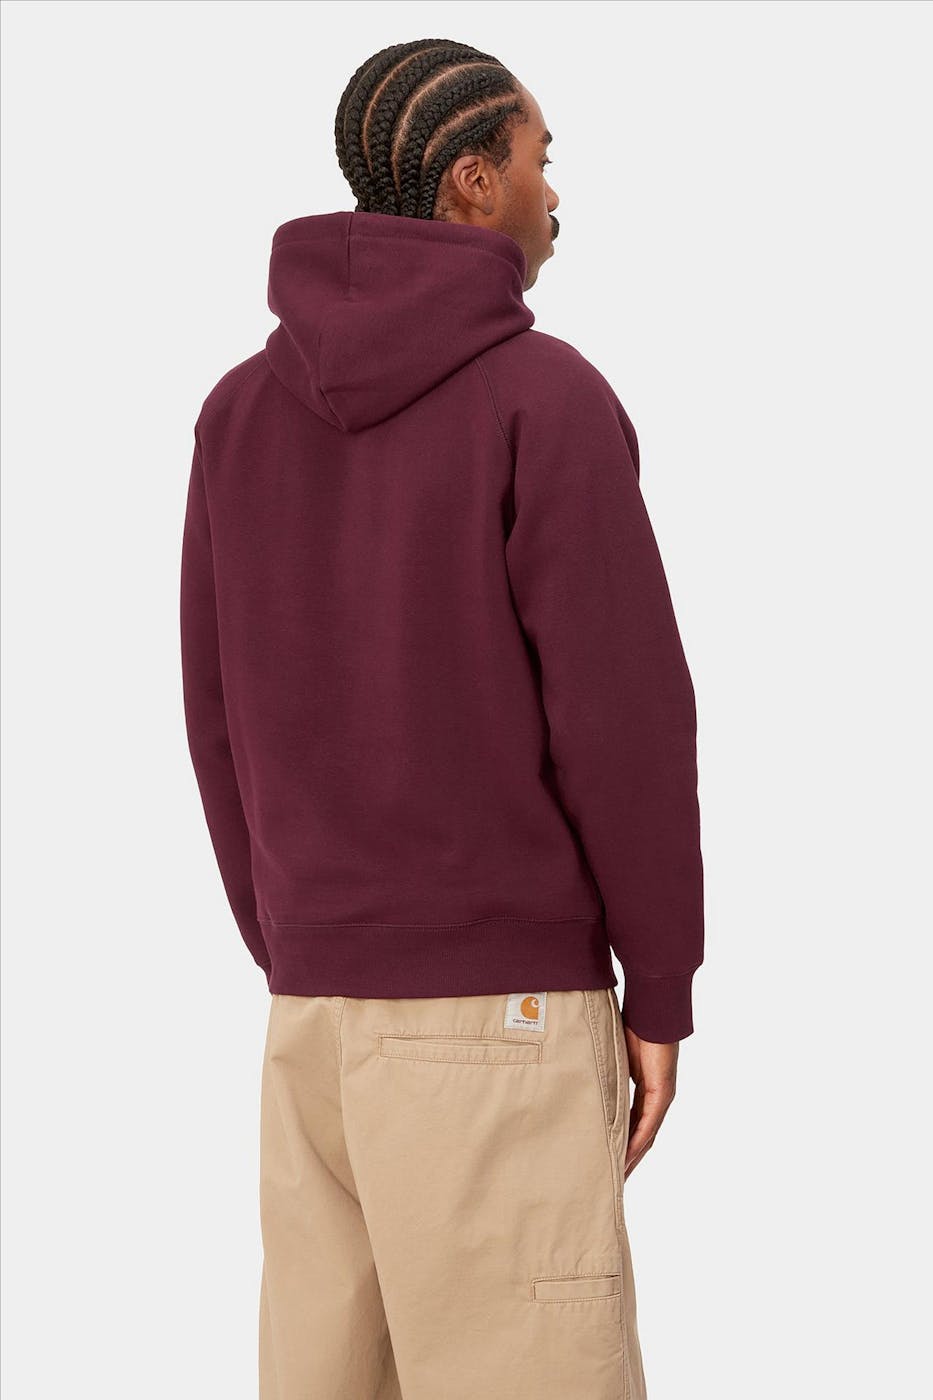 Carhartt WIP - Bordeaux Hooded Chase sweater